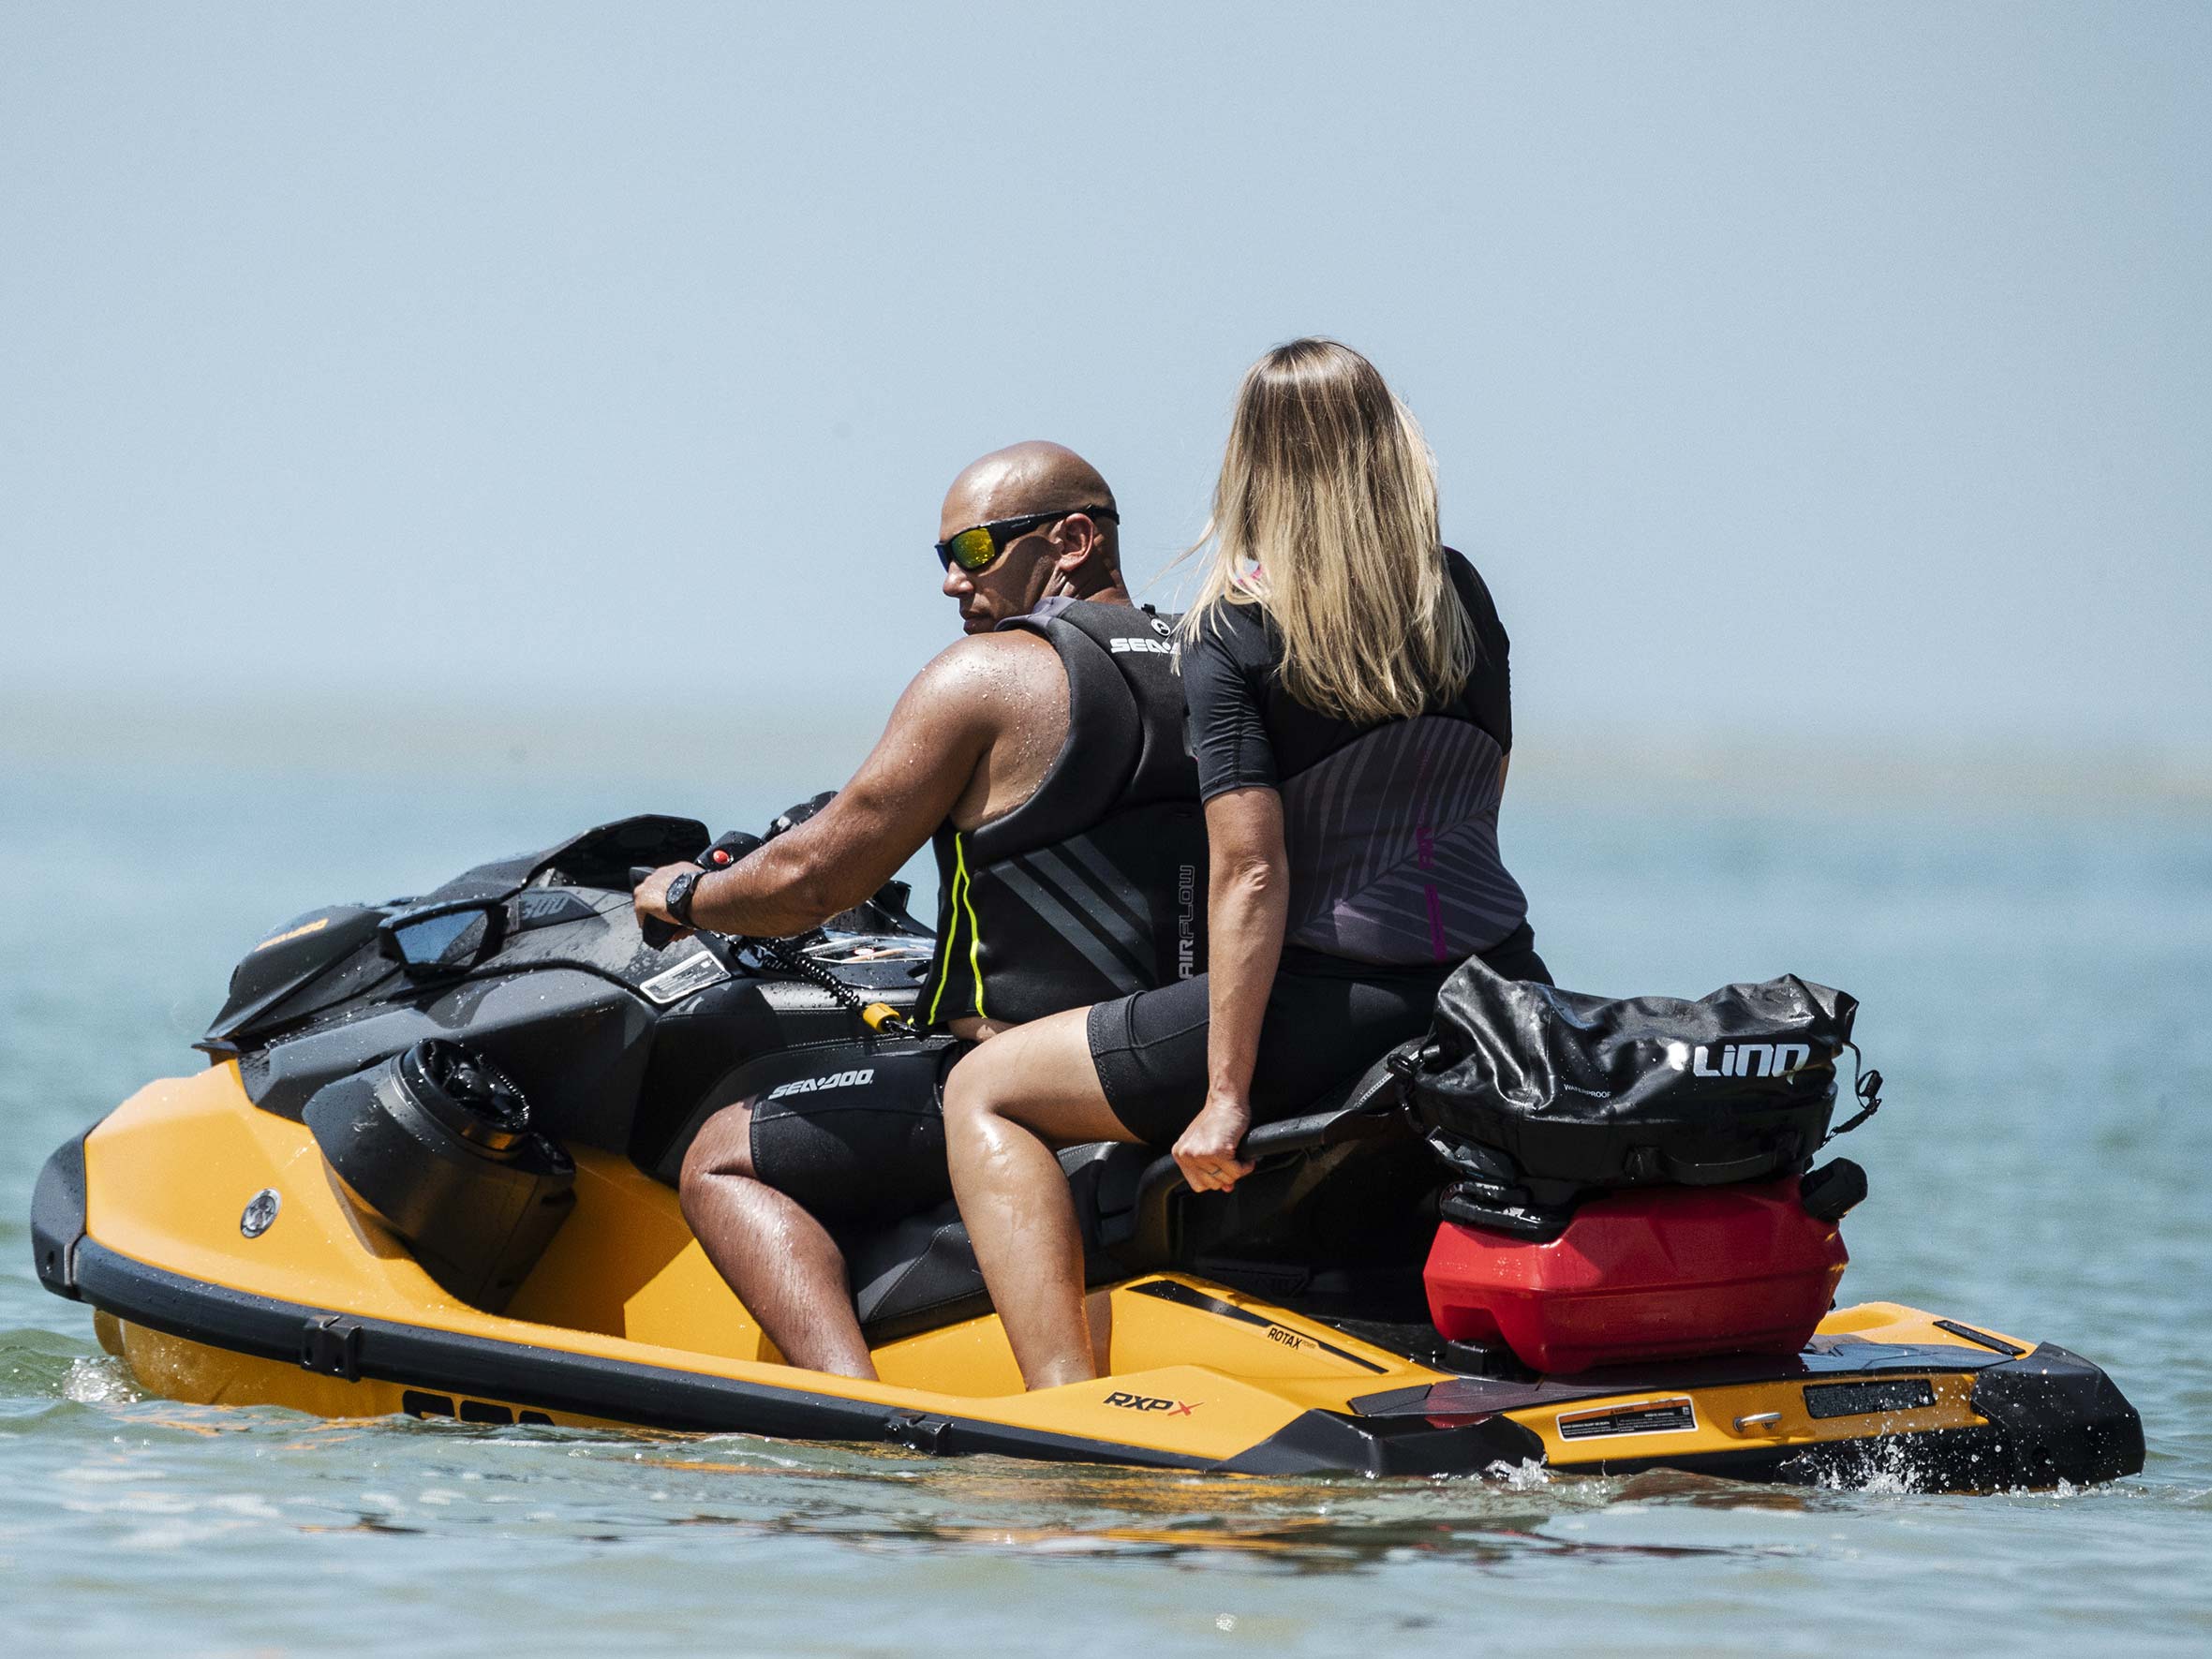 Couple riding a Sea-Doo RXP-X with a LinQ system